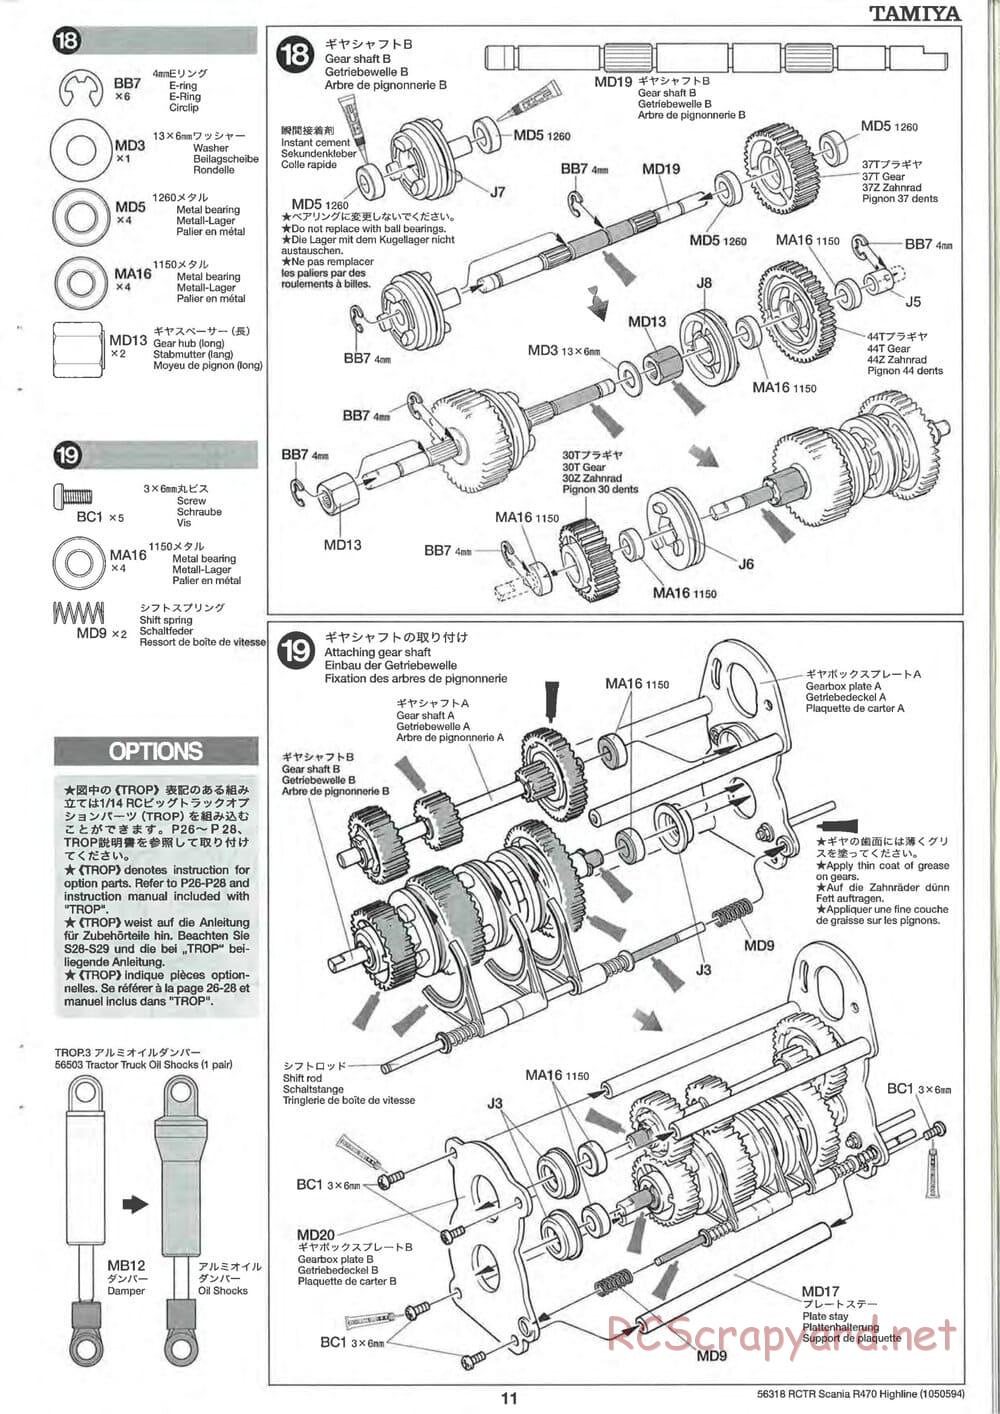 Tamiya - Scania R470 Highline Tractor Truck Chassis - Manual - Page 11